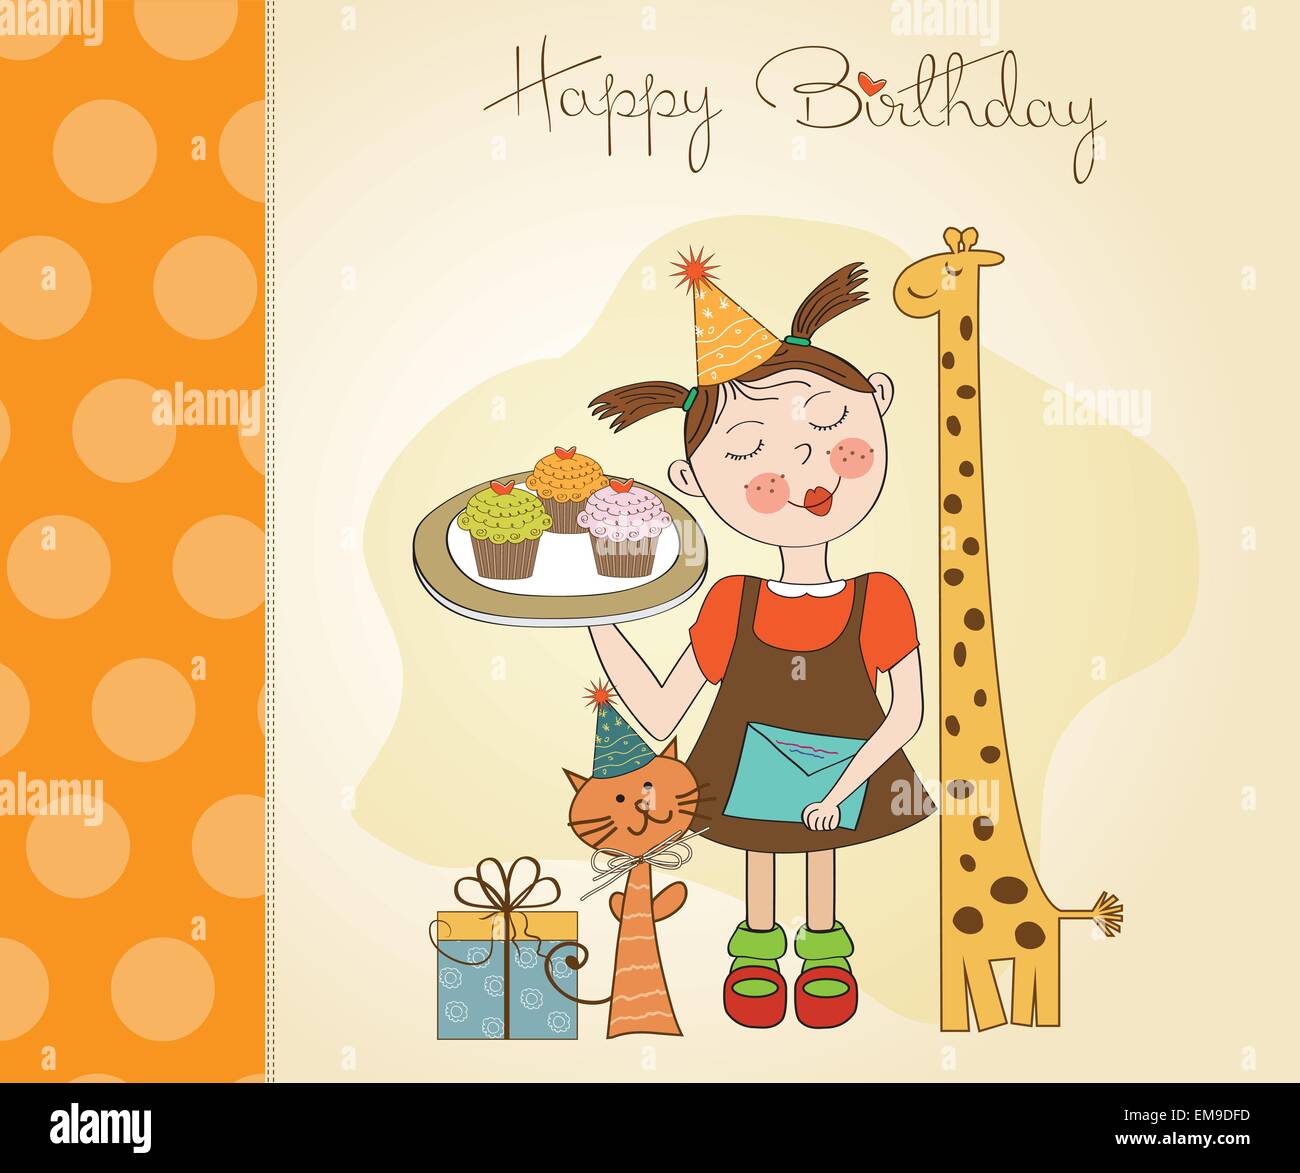 Happy Birthday card with funny girl, animals and cupcakes Stock ...